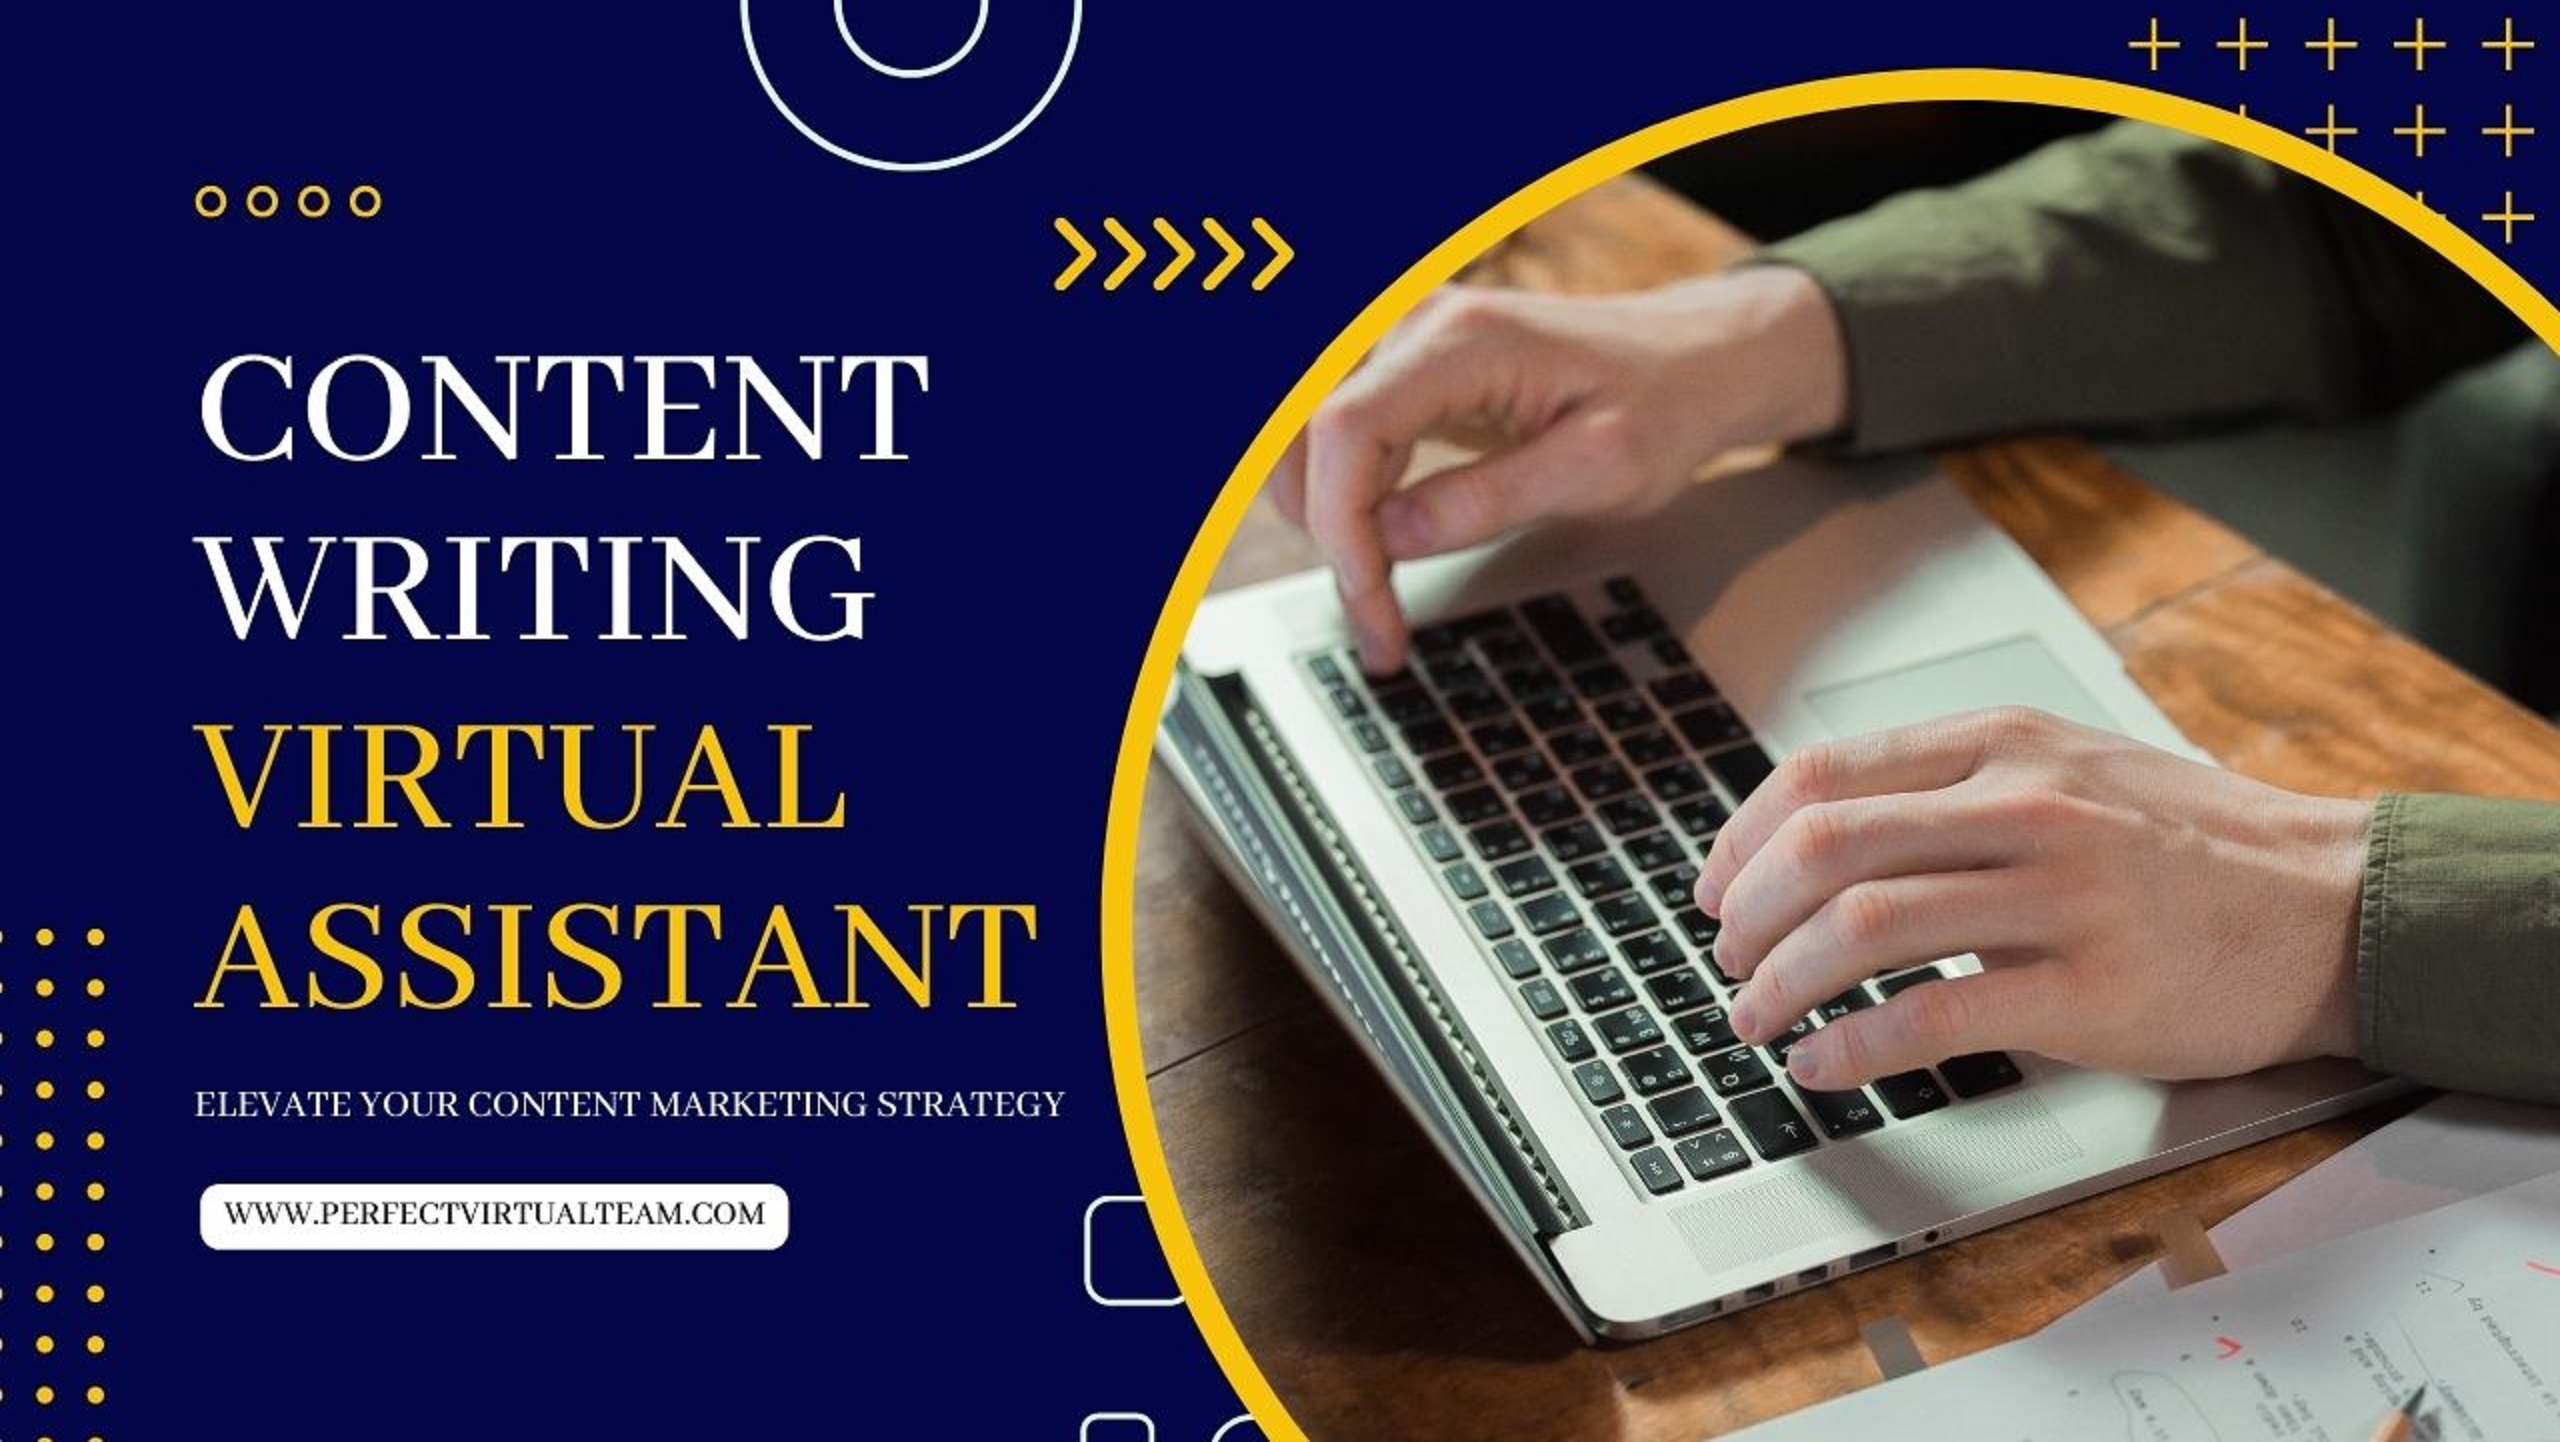 Content Writing Virtual Assistant